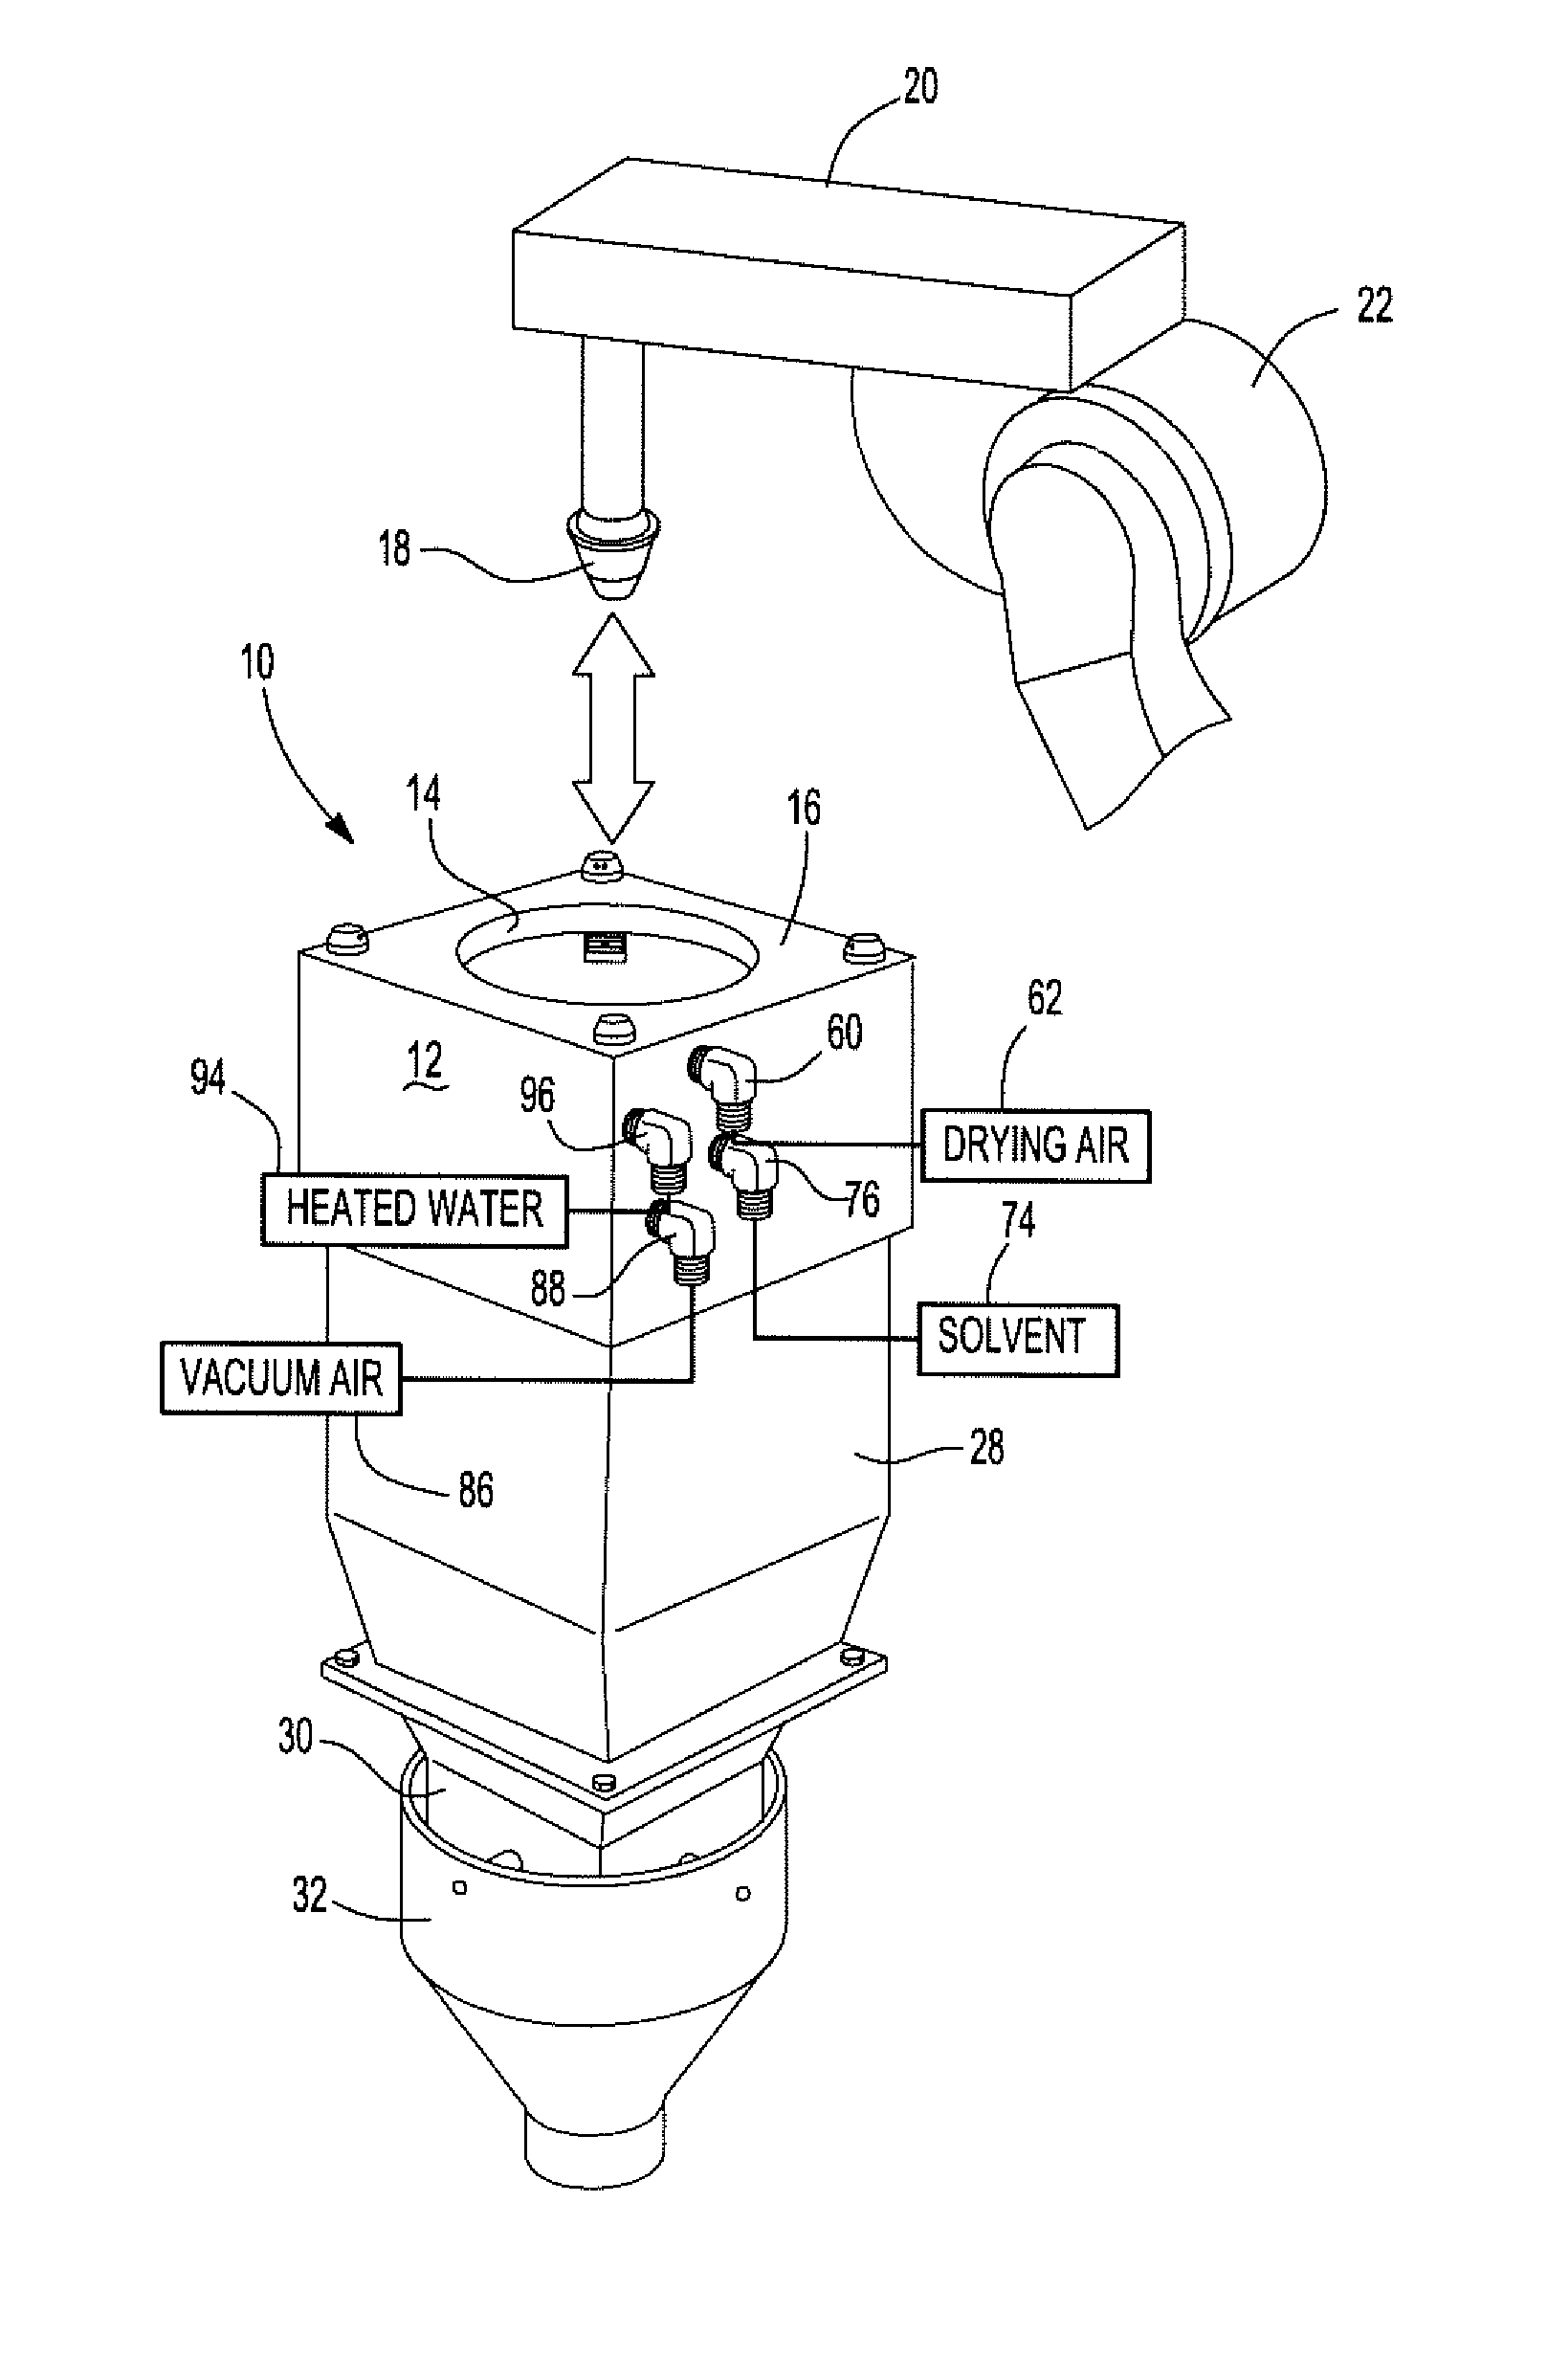 Apparatus for non-contact cleaning a paint spray tip